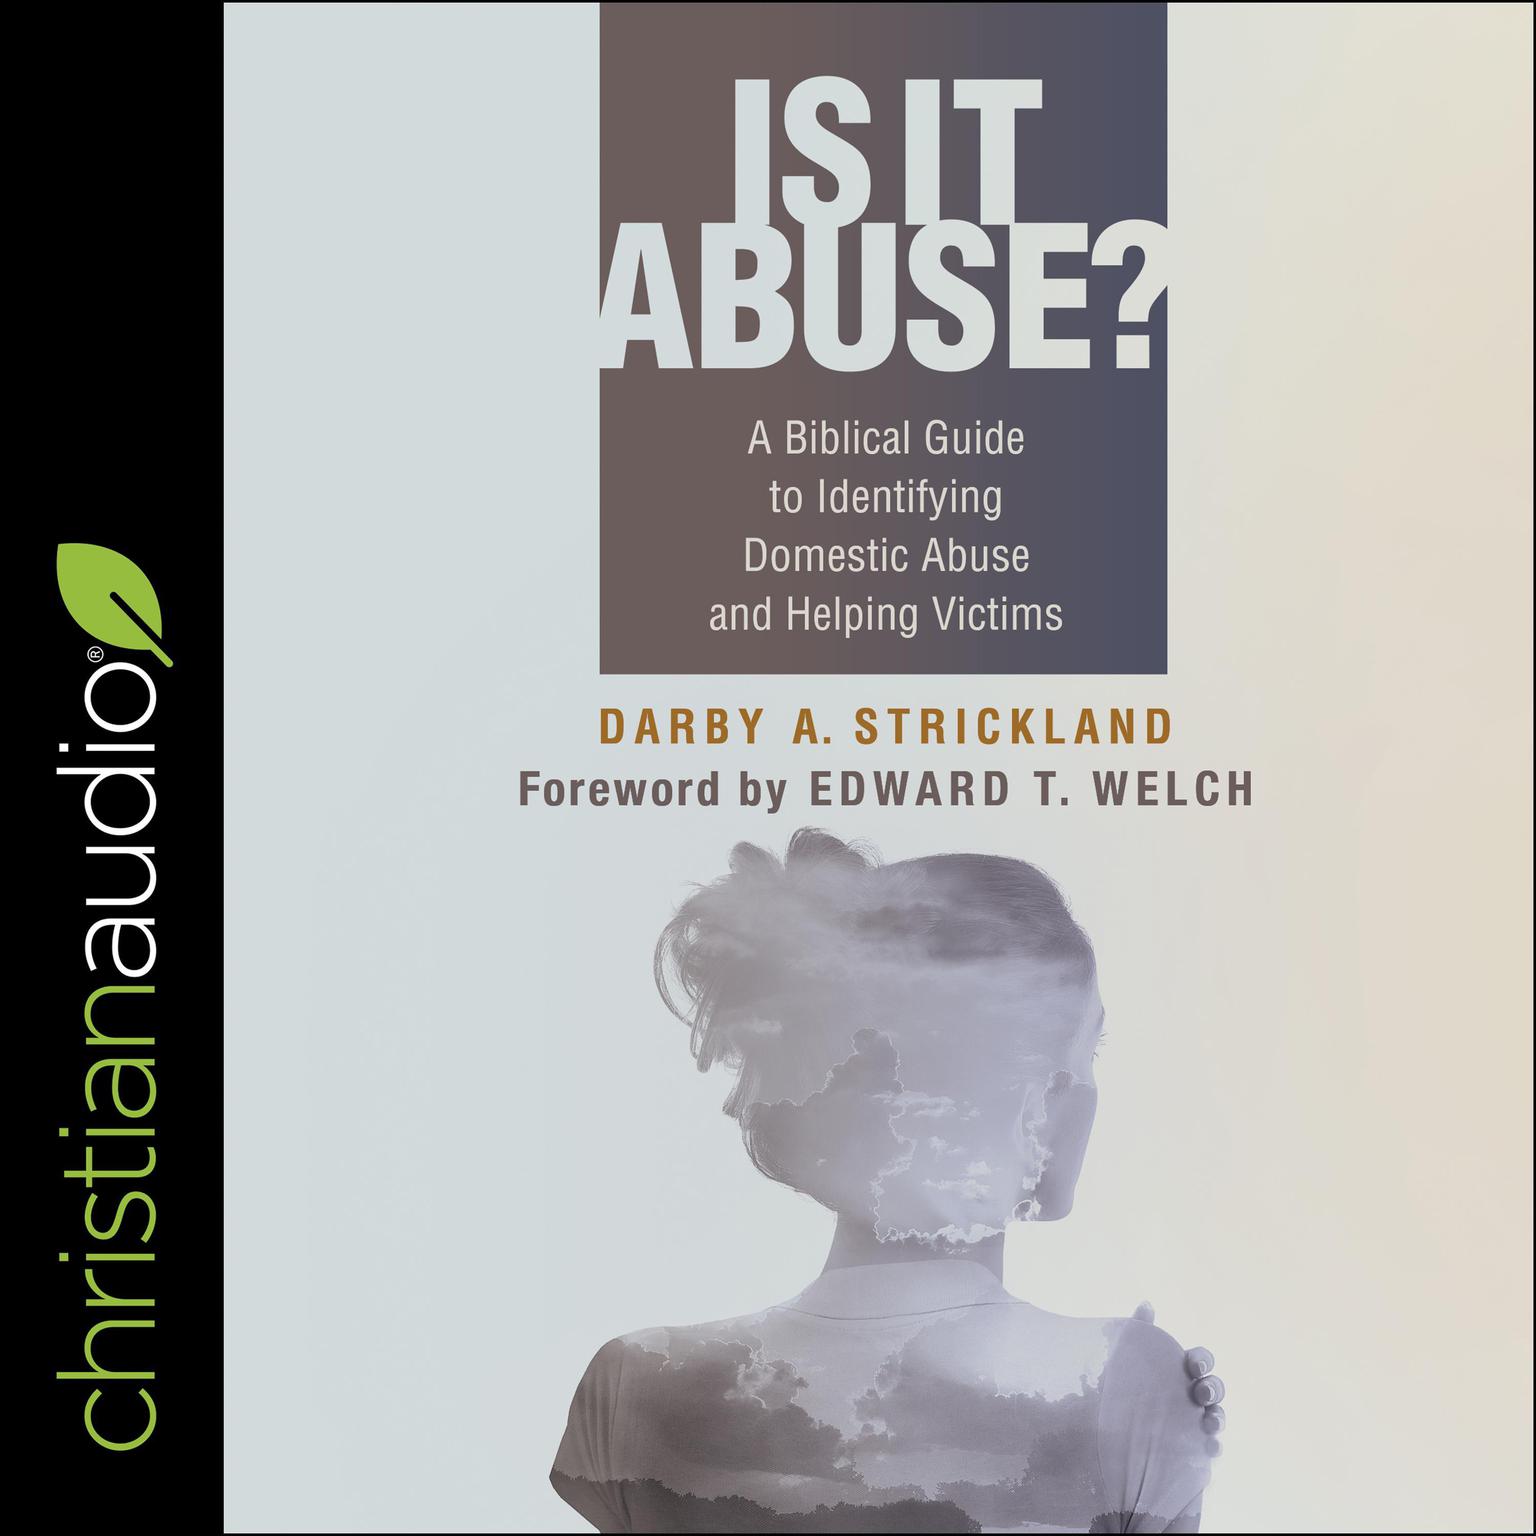 Is It Abuse?: A Biblical Guide to Identifying Domestic Abuse and Helping Victims Audiobook, by Darby Strickland